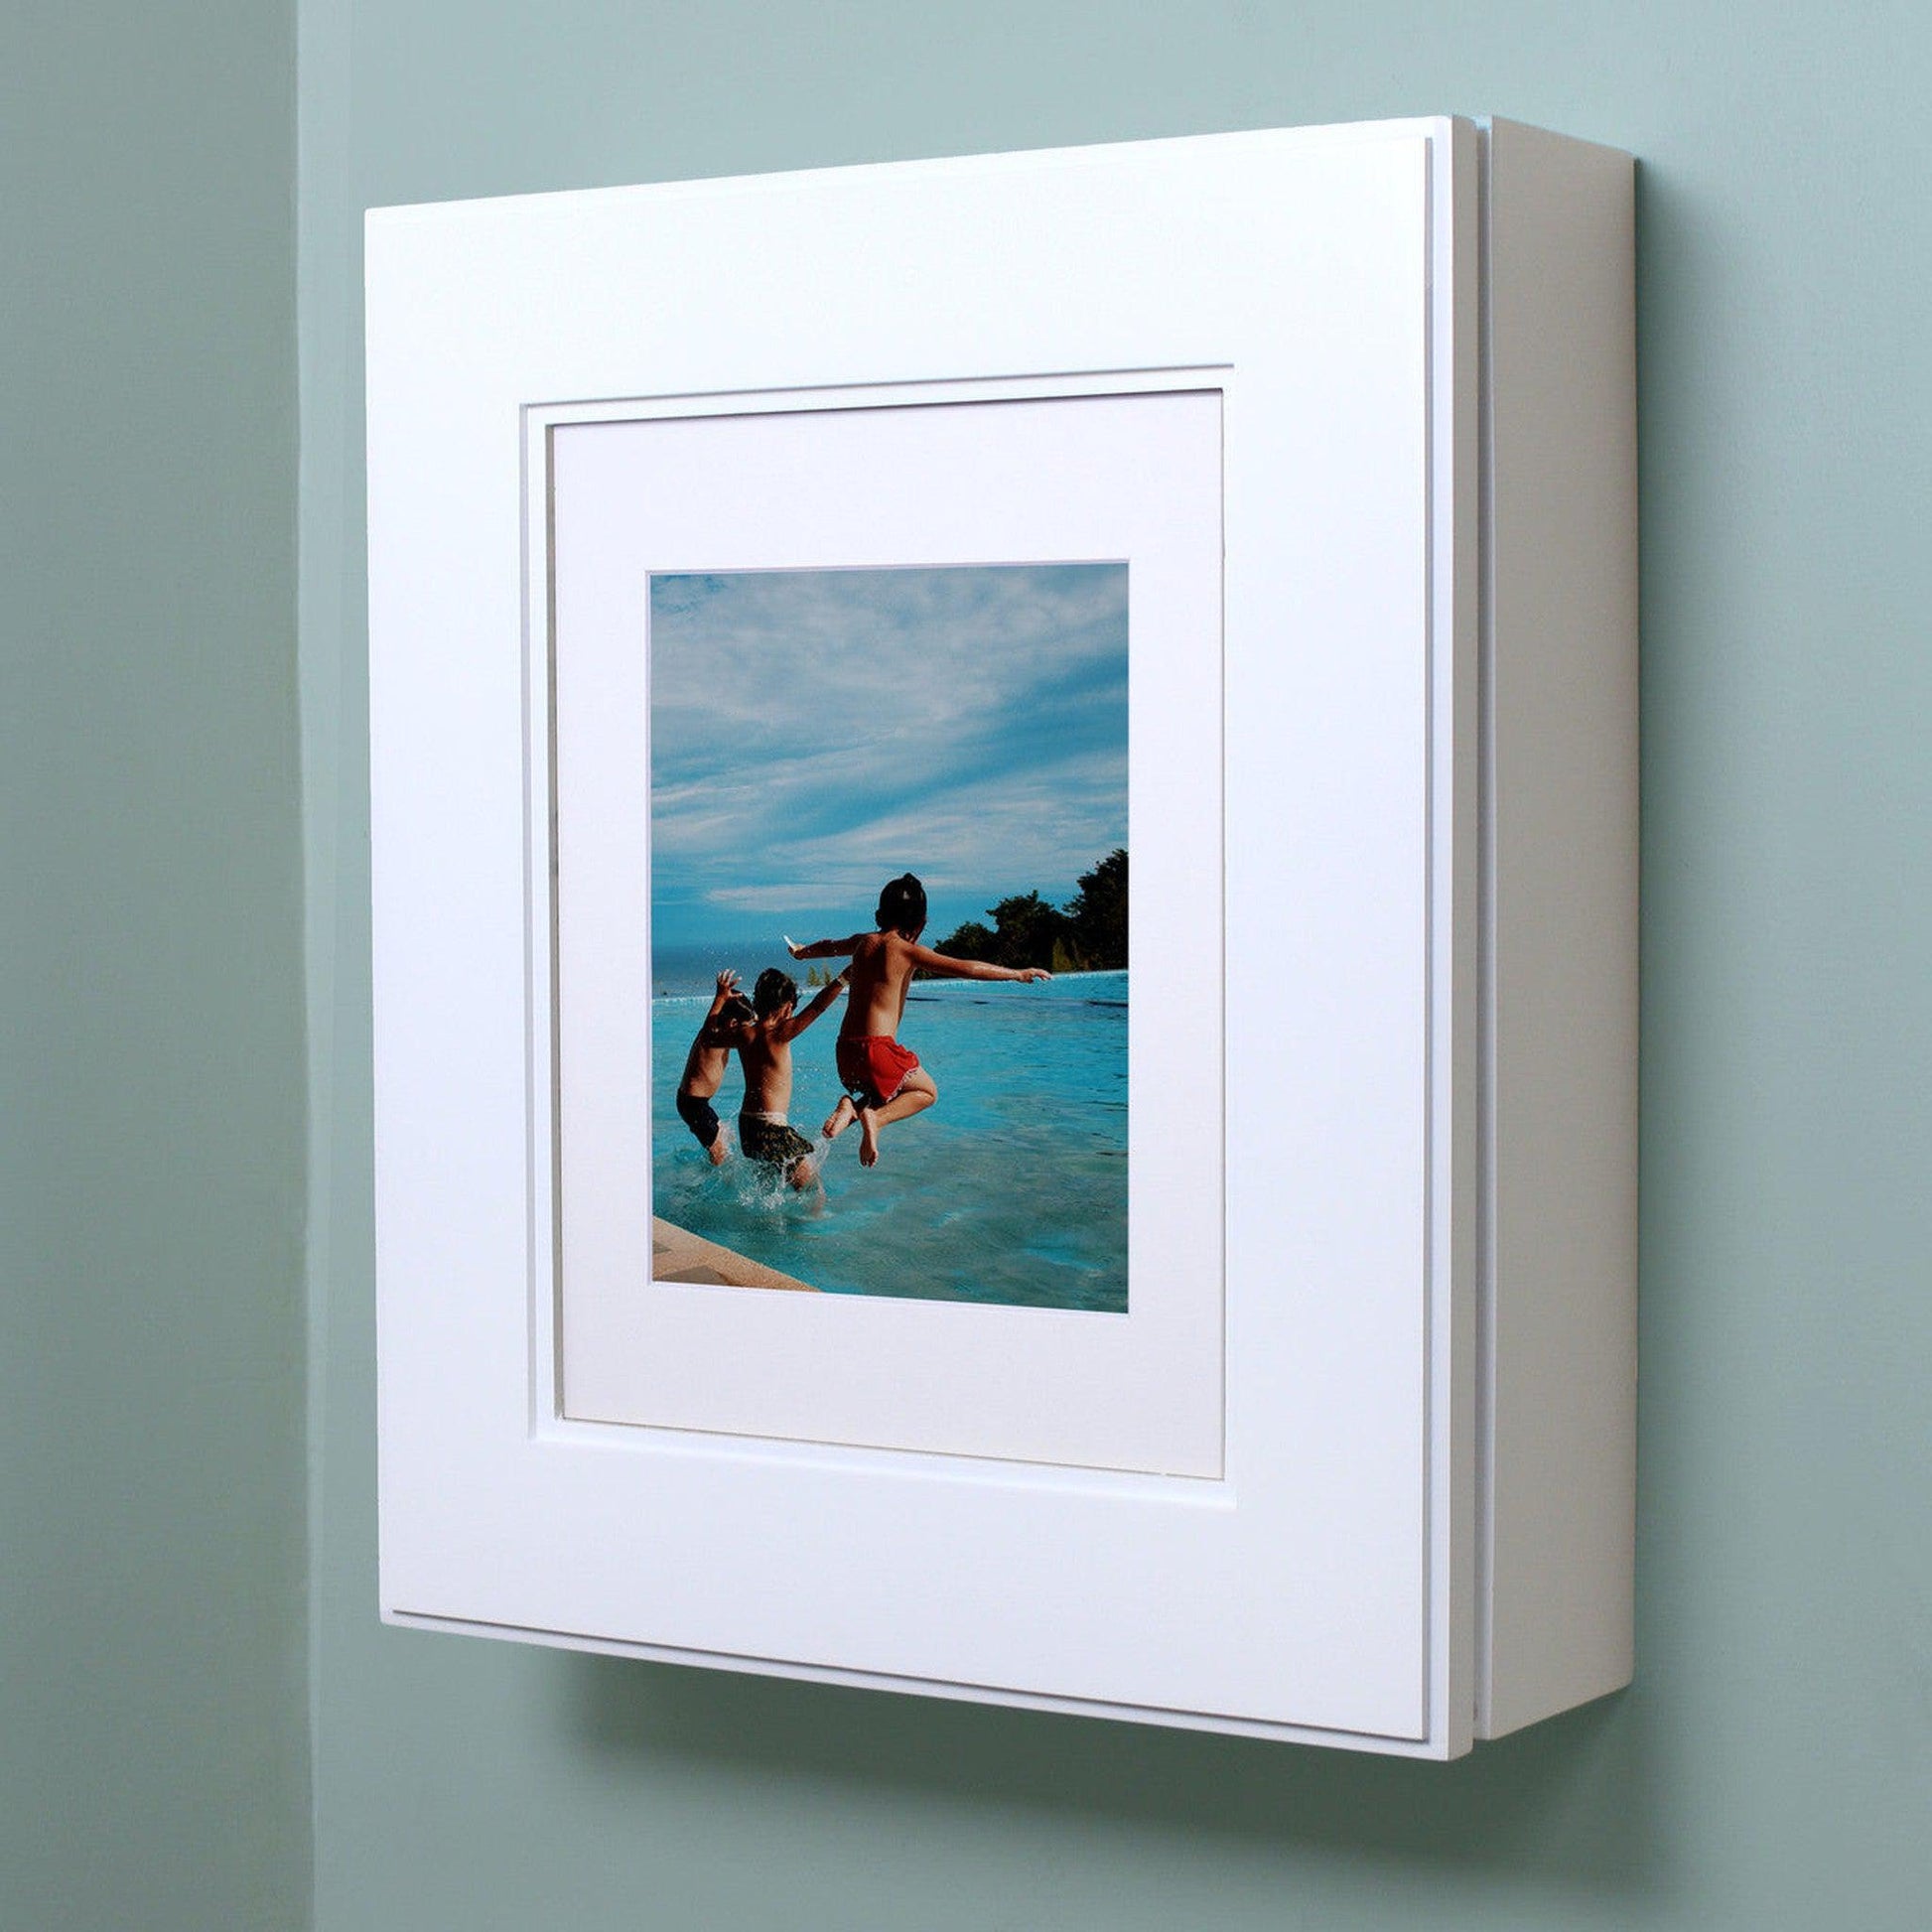 Fox Hollow Furnishings 20" x 17" White Shaker Wall Mount Picture Frame Medicine Cabinet With White 8" x 10" Matting